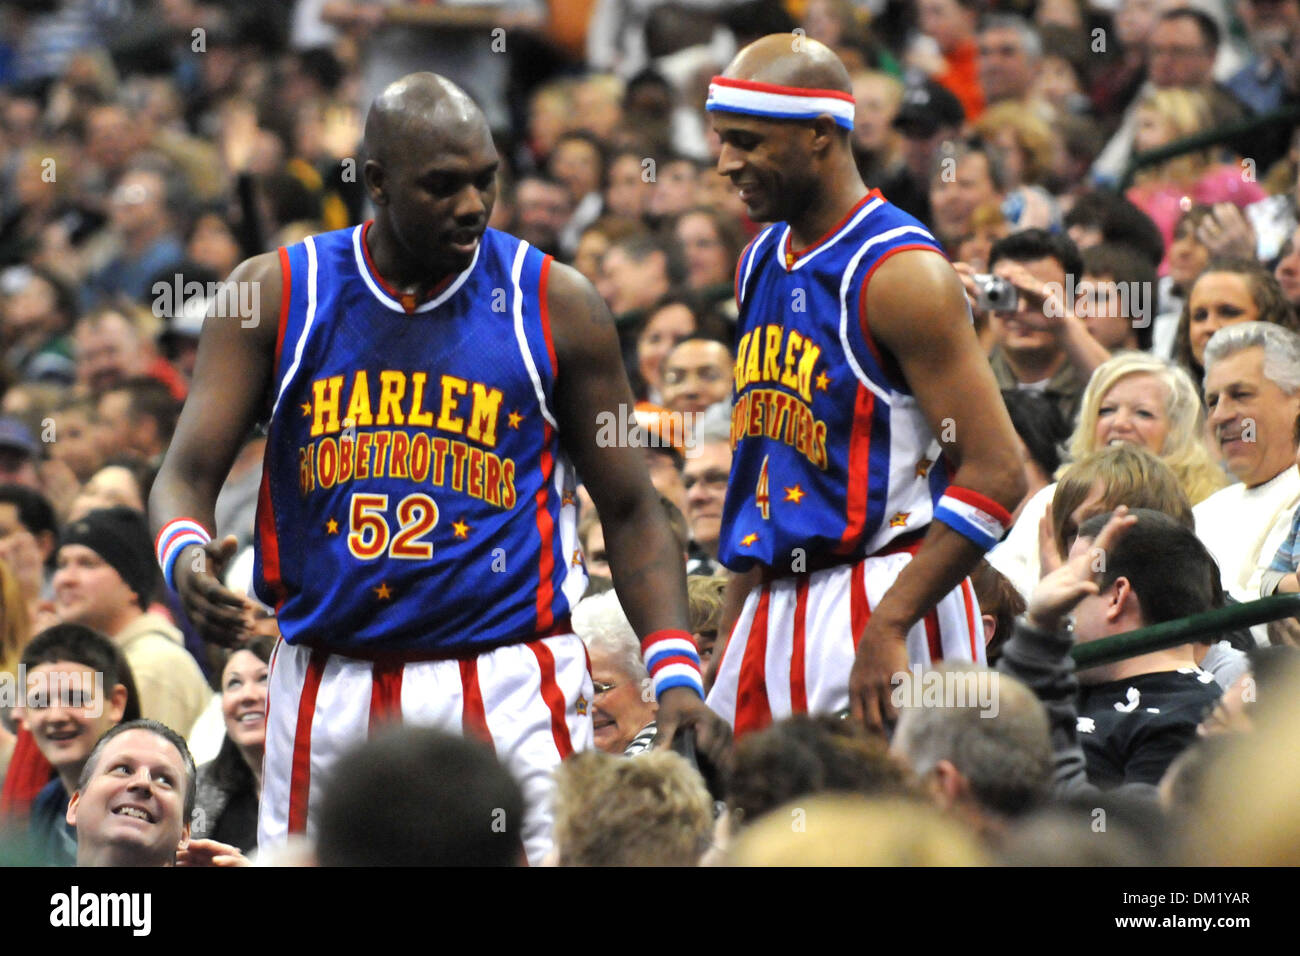 Harlem Globetrotters Big Easy Lofton #52 and Flight Time Lang #4 during the  game against the Generals at the American Airlines Center in Dallas, TX.  The Globetrotters won 78-61. (Credit Image: ©